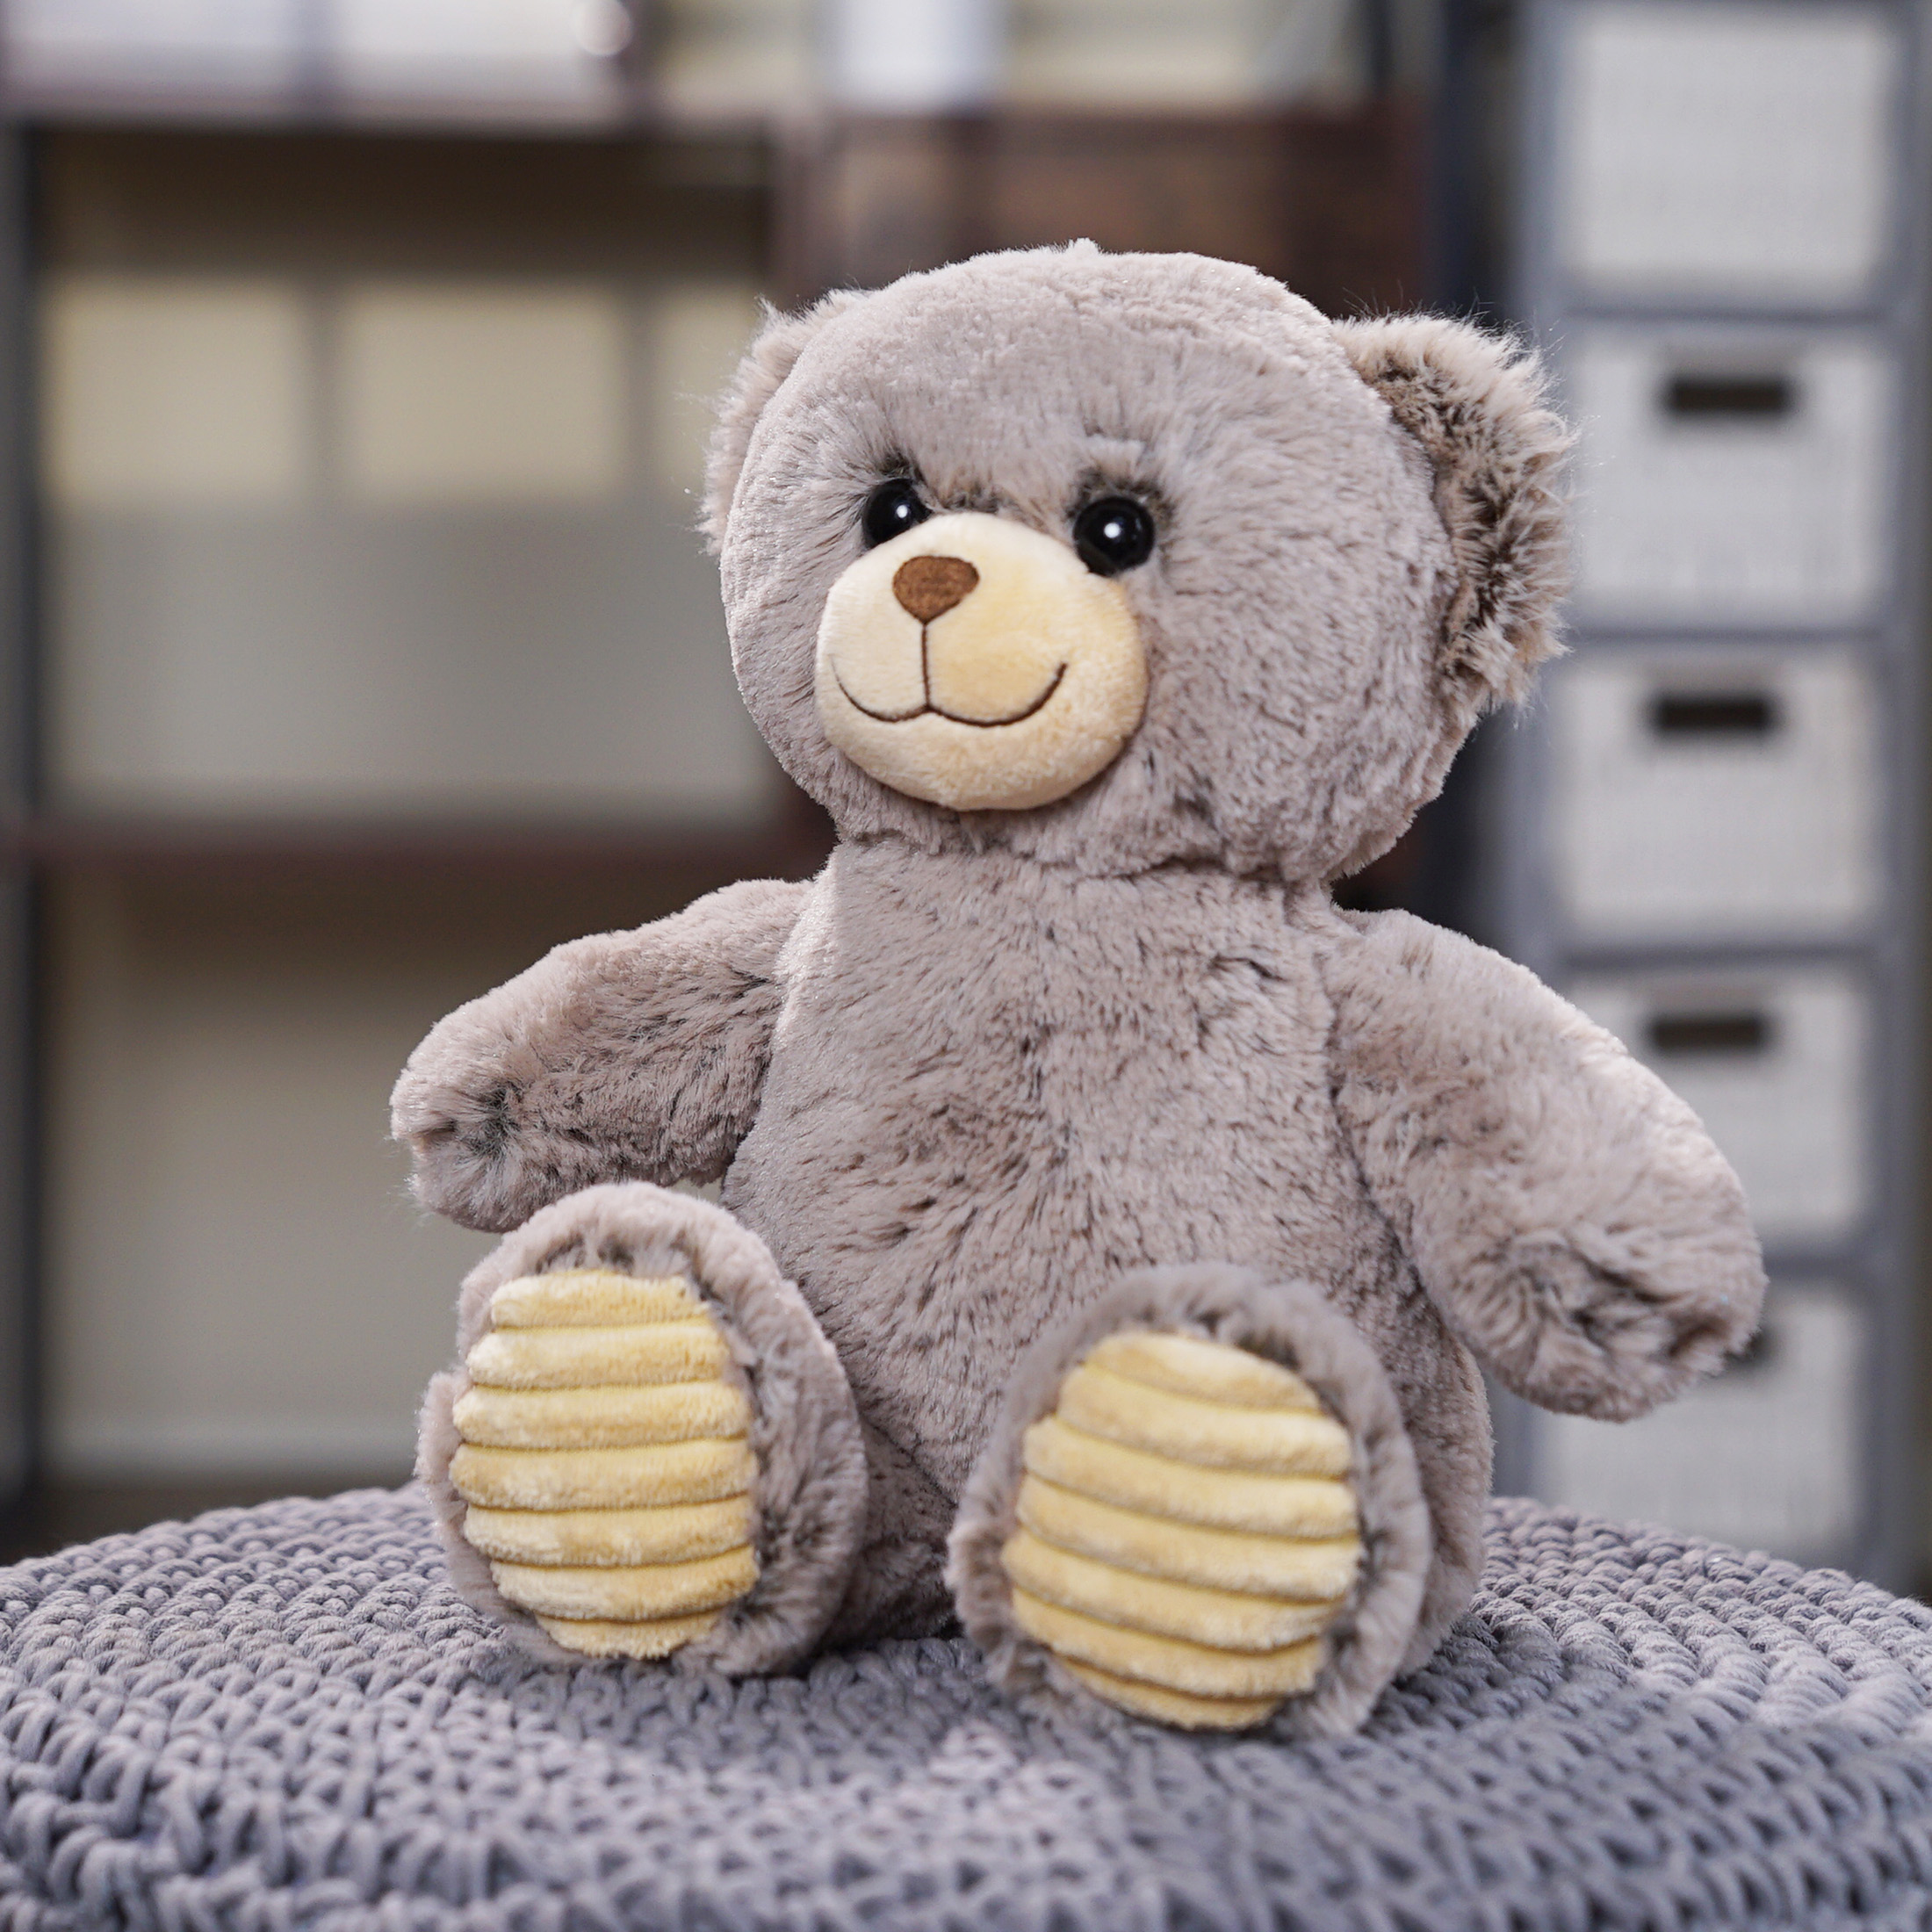 Spark Create Imagine Teddy Bears Plush Toy 14” Overall-Beige and Brown - image 3 of 6